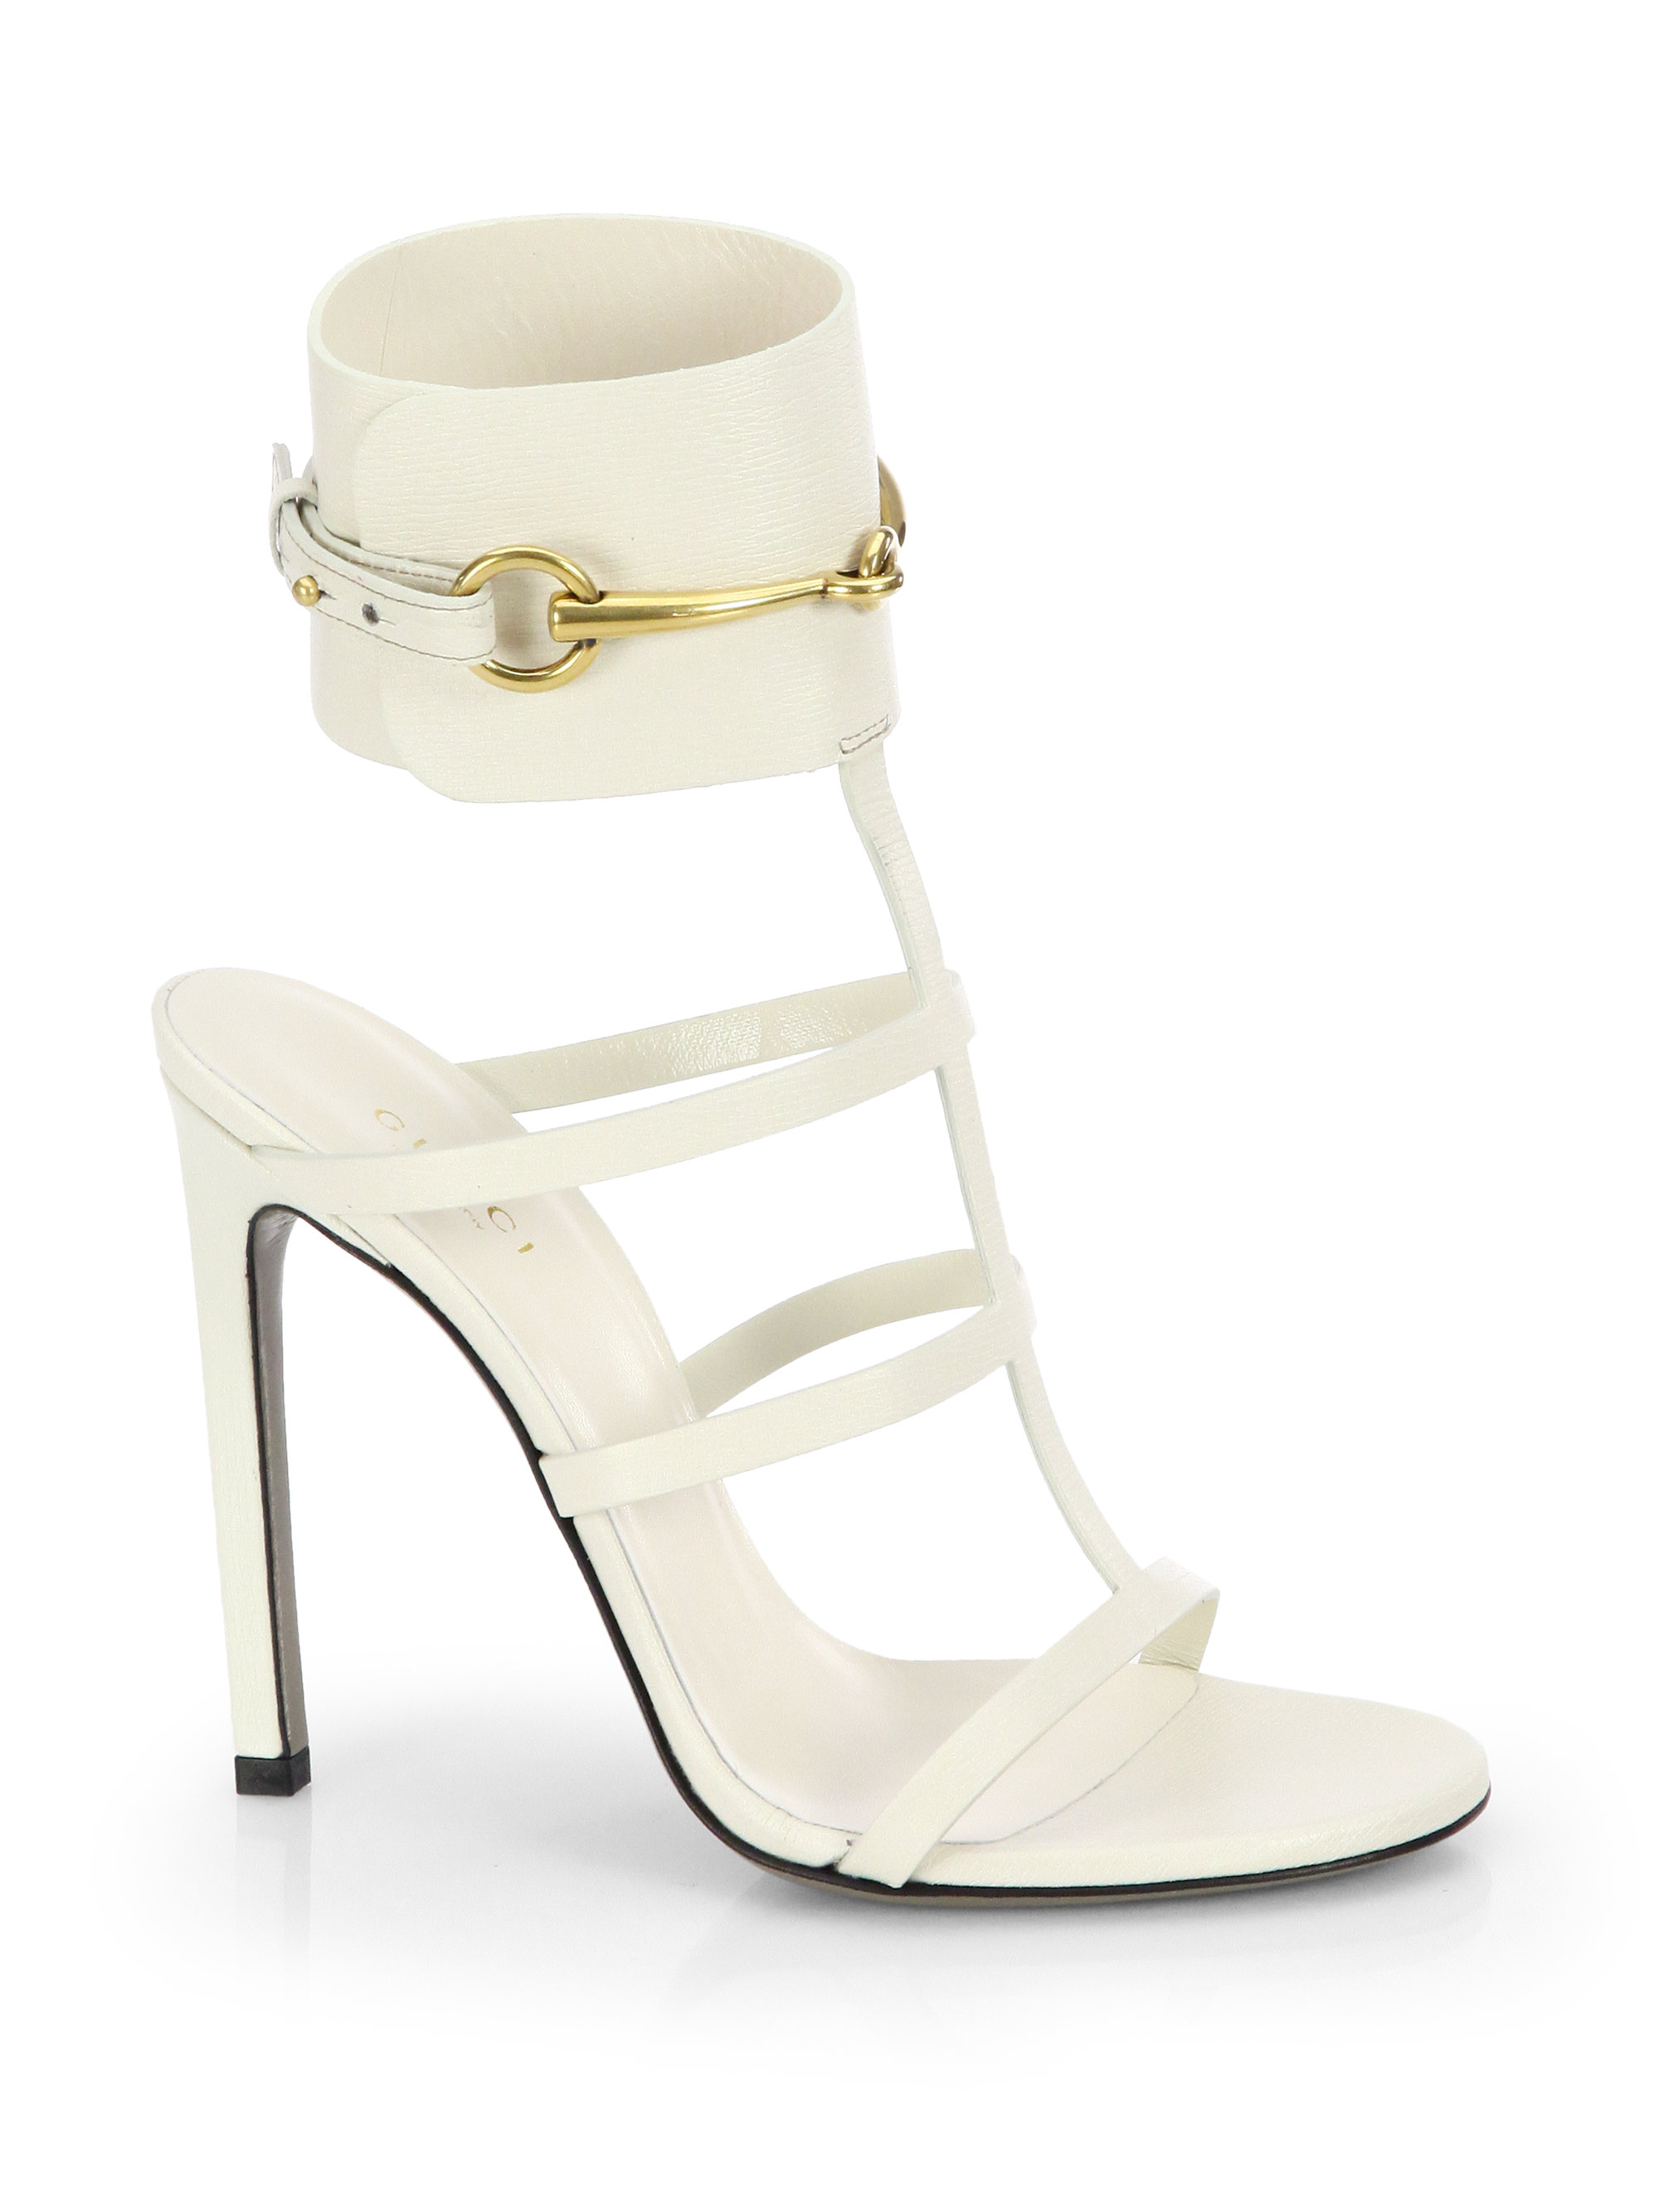 Gucci Ursula Leather Cage Sandals in White - Lyst